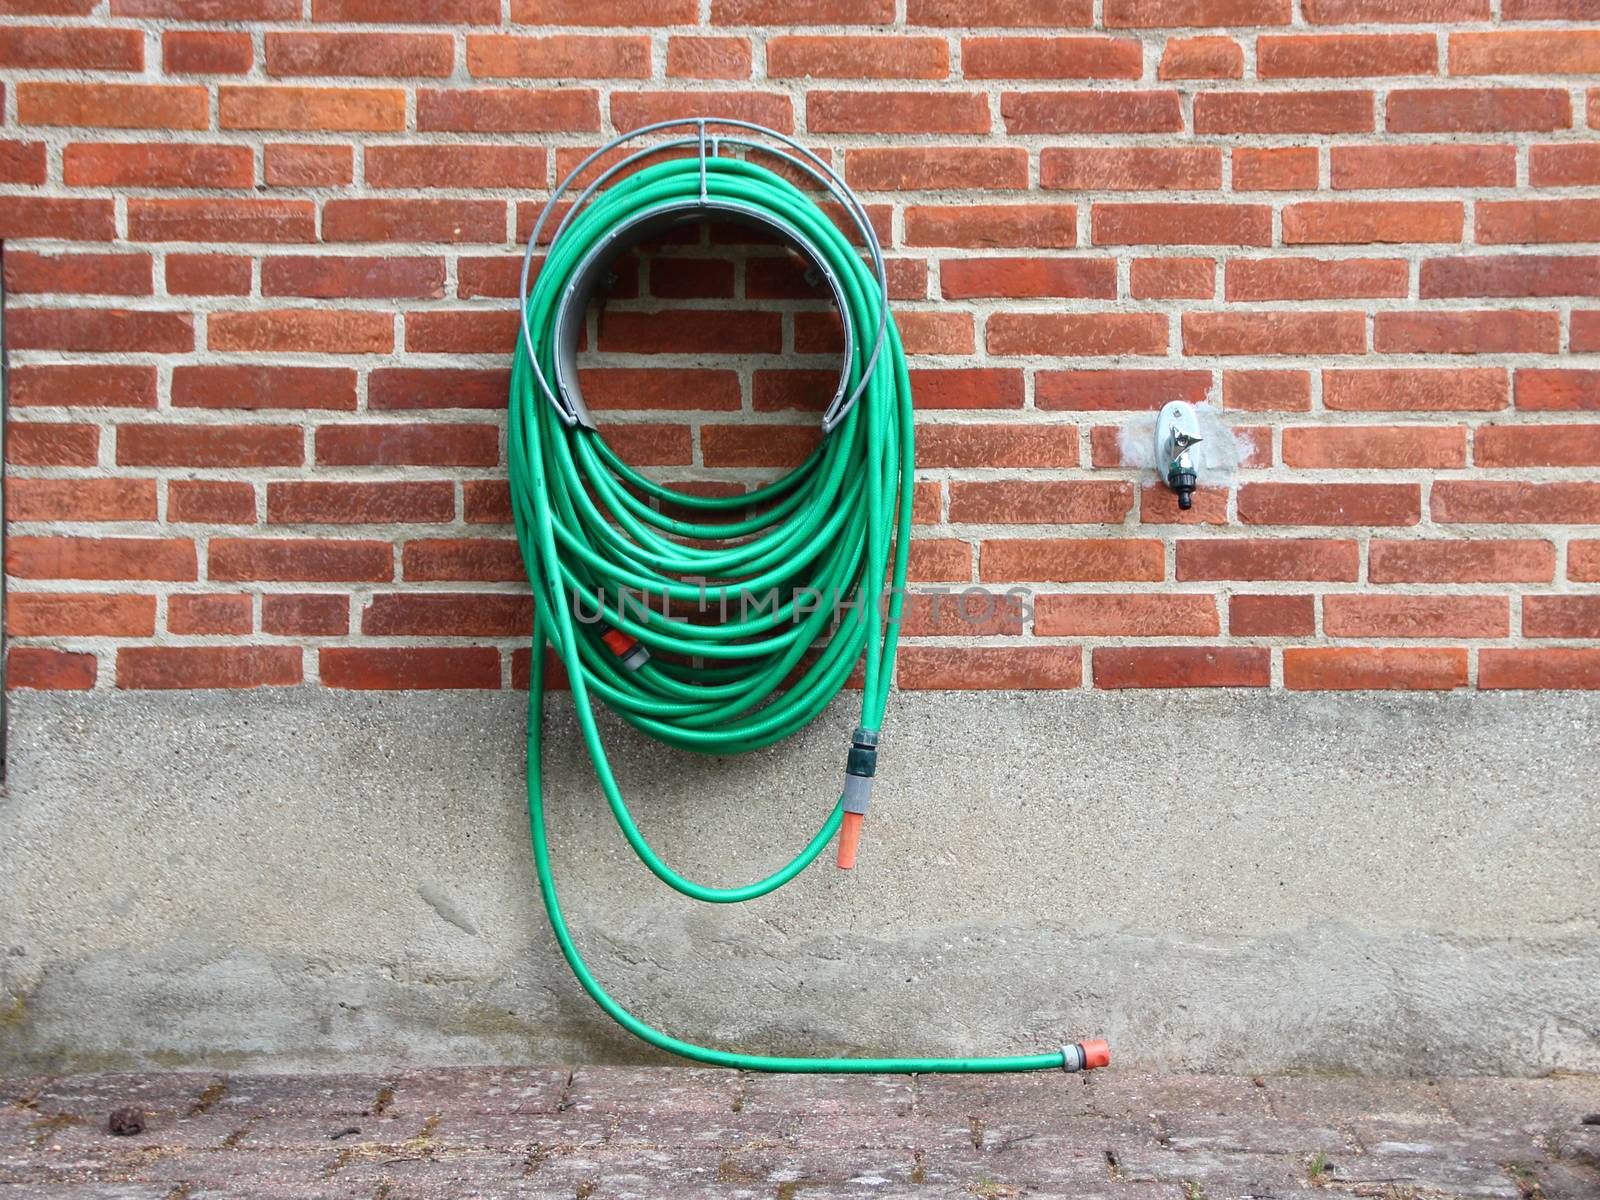 Green Garden Water Hose Hanging on Red Brickwall. Not connected to Water Tap.